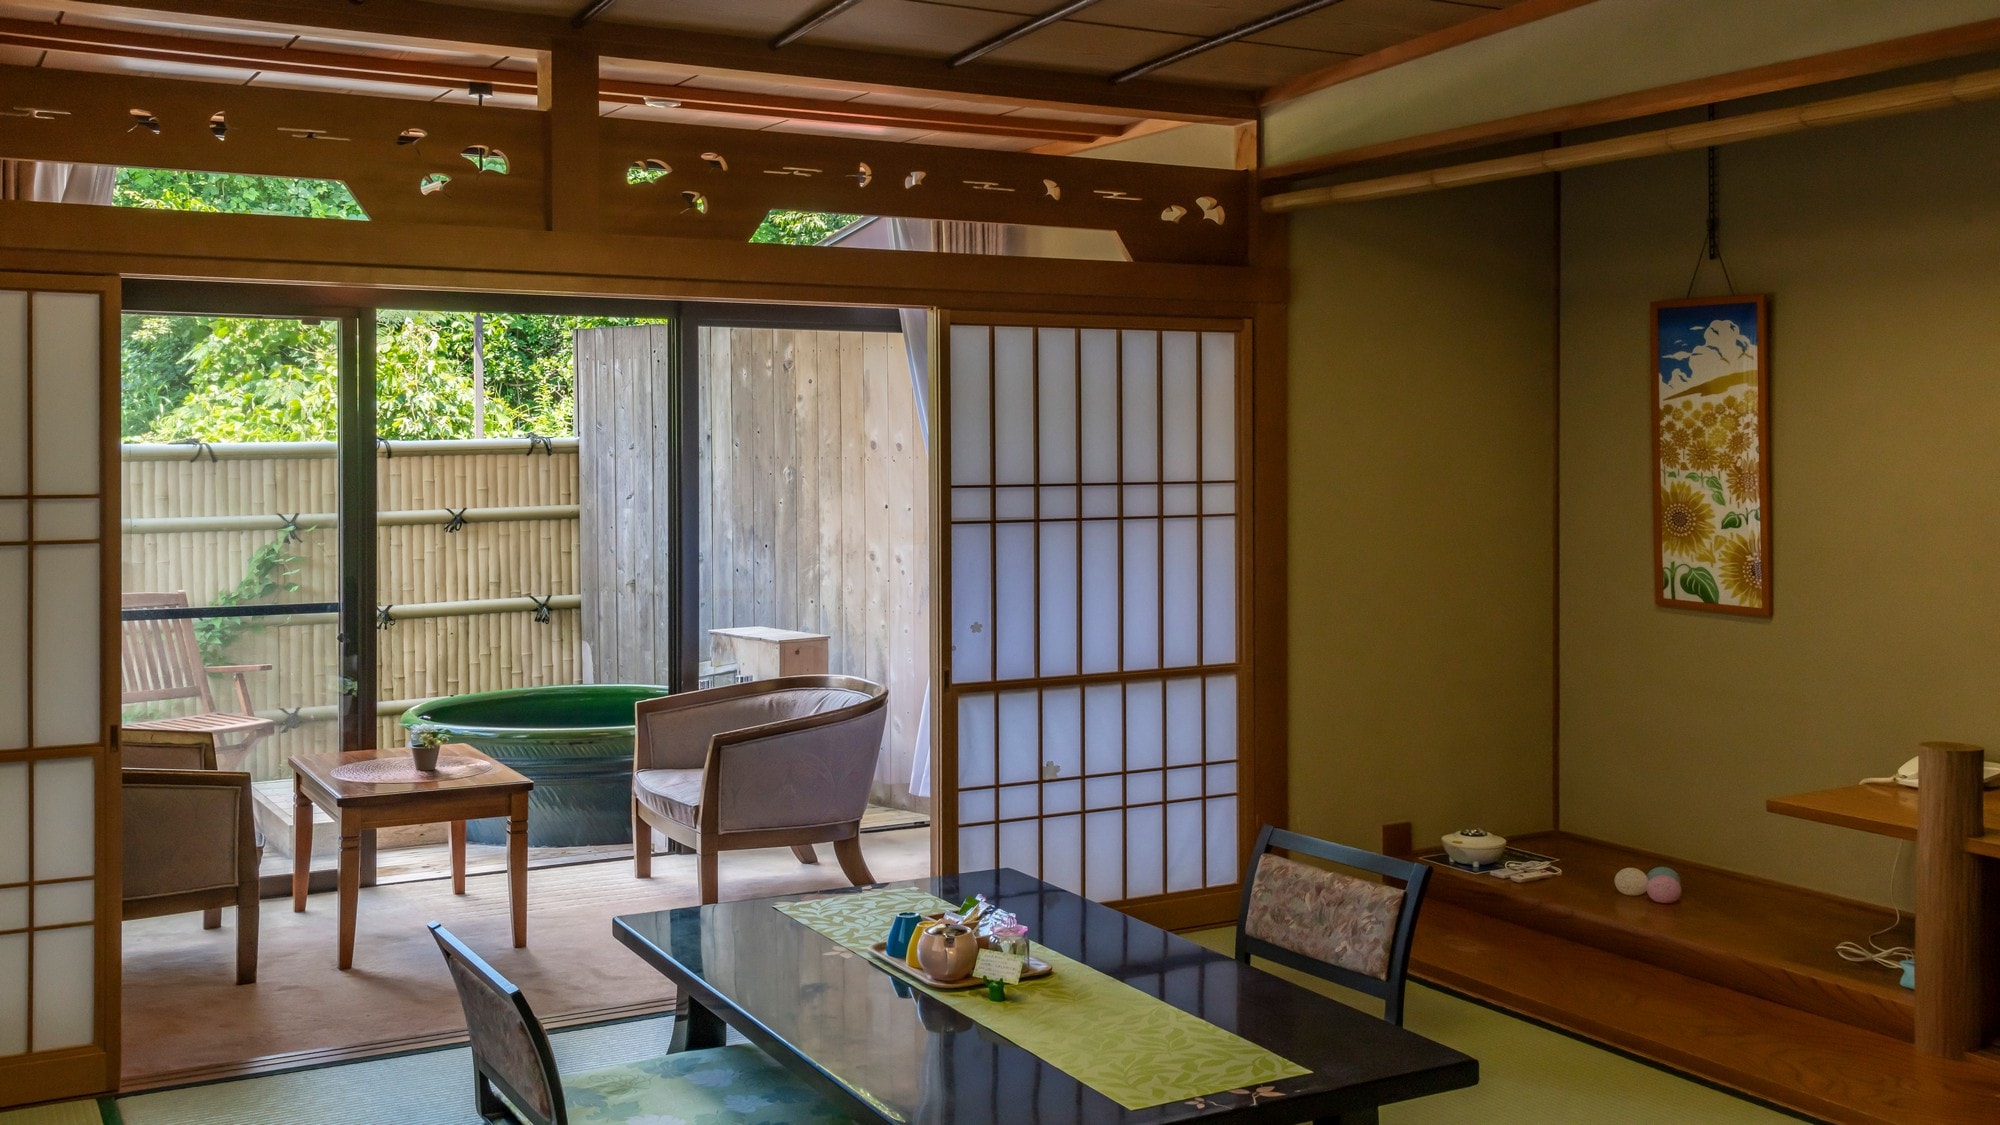 You can heal your daily fatigue in a relaxing Japanese-style room.